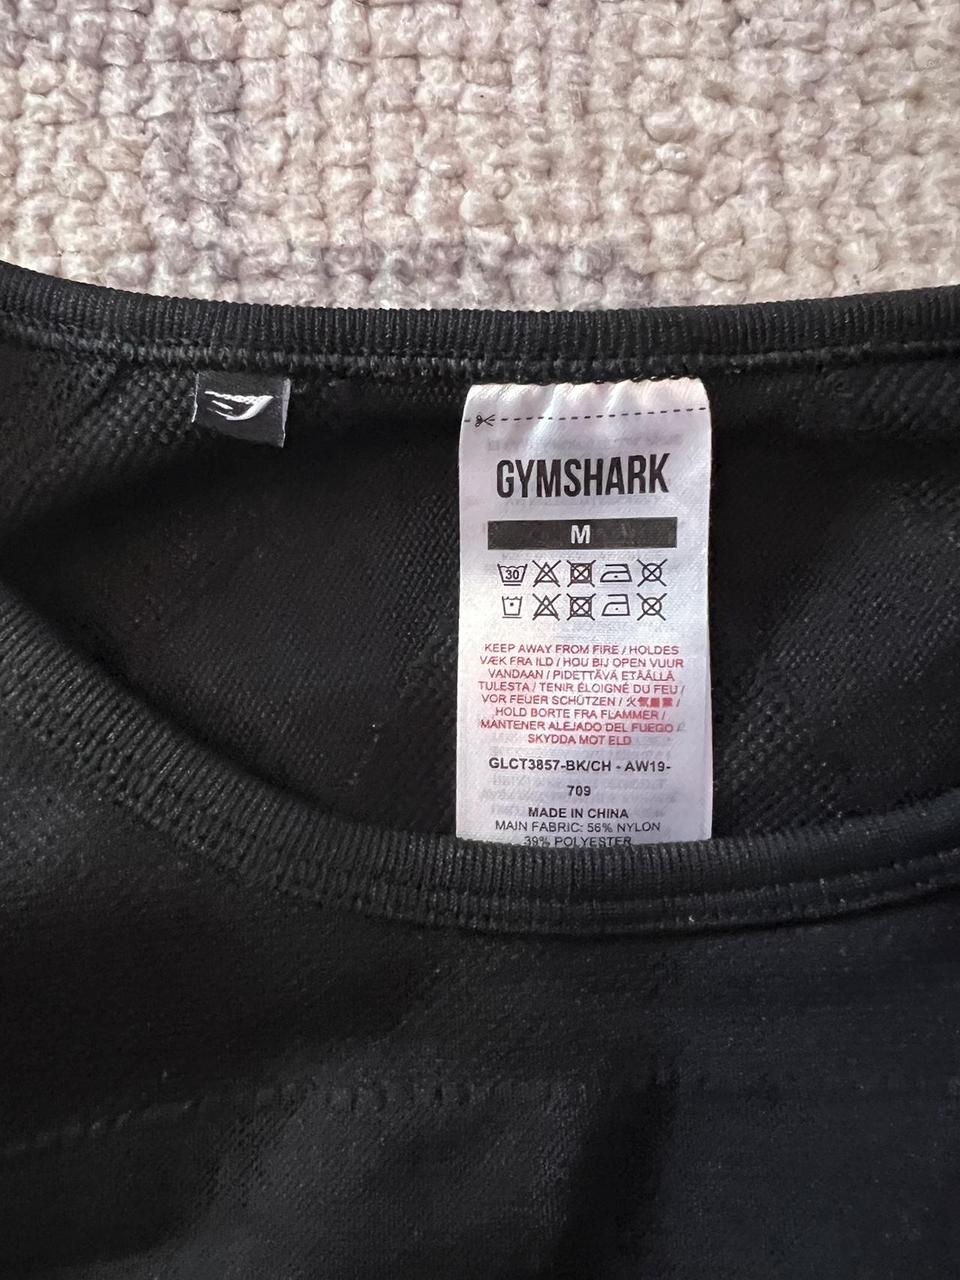 Black gymshark crop top - size m - style with the... - Depop